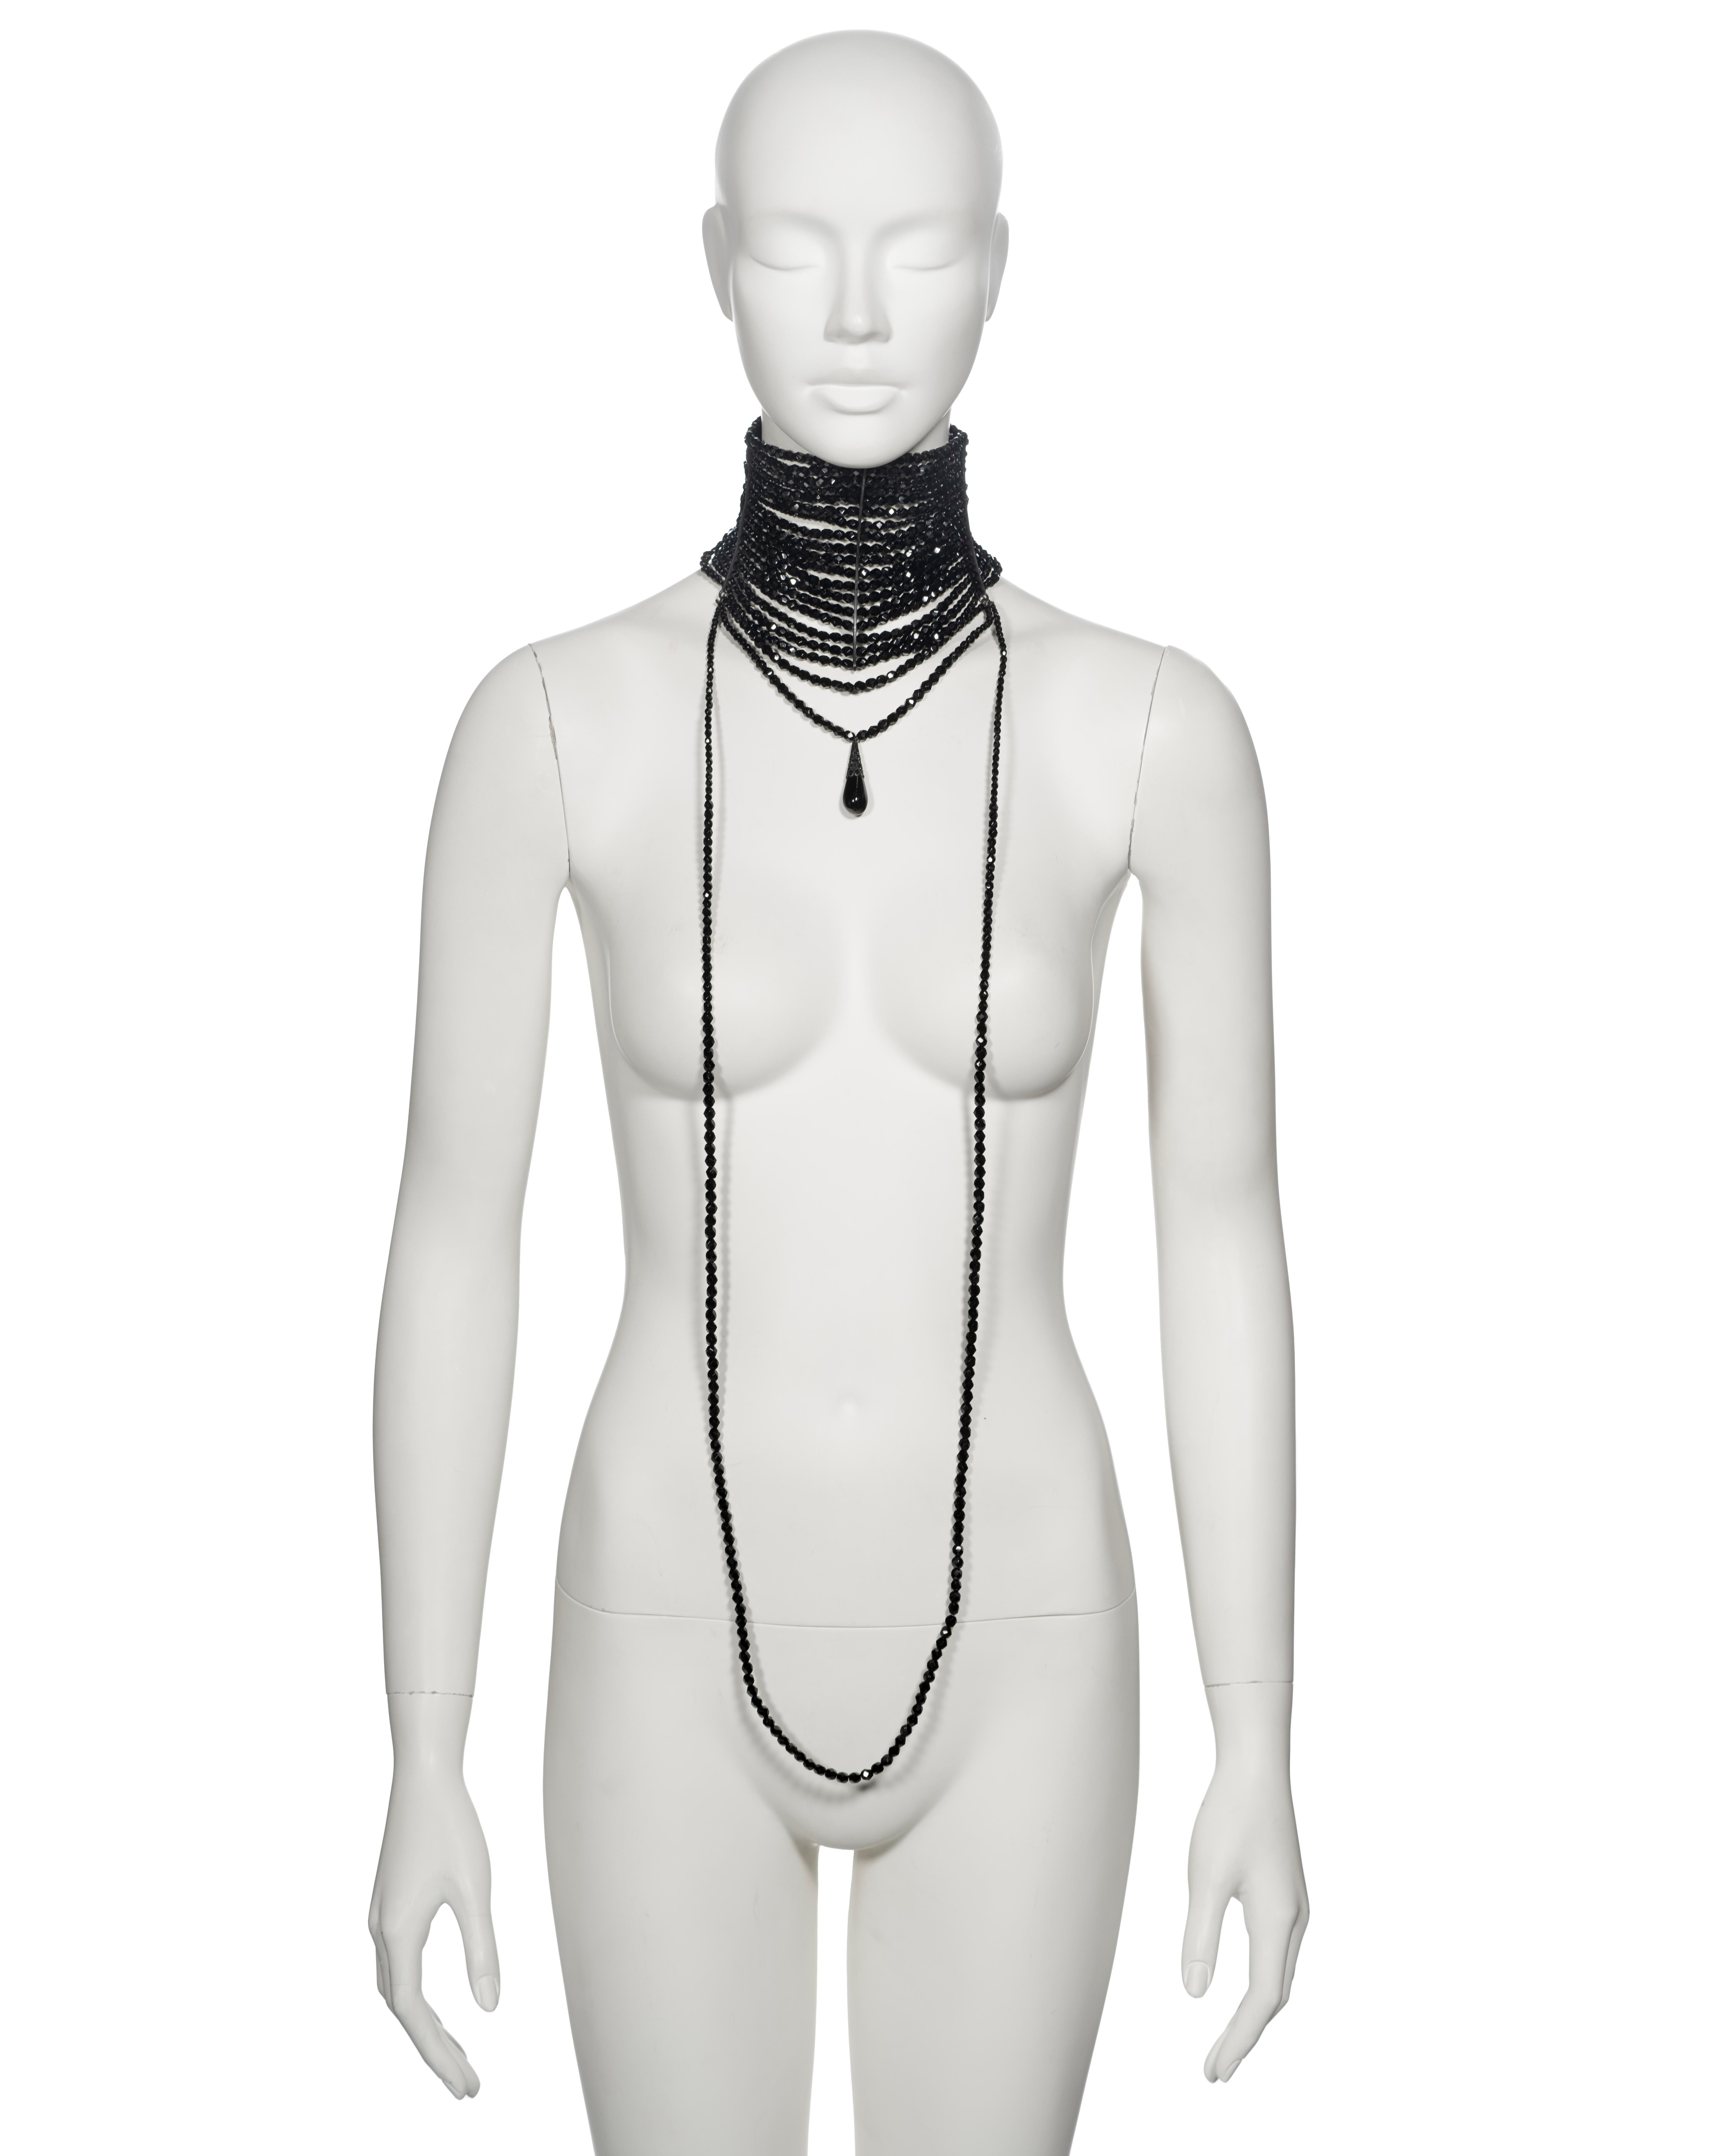 ▪  Archival Christian Dior Choker Necklace
▪ Creative Director: John Galliano
▪ Spring-Summer 1999
▪ Sold by One of a Kind Archive
▪ Made in France   
▪ Black faceted beads
▪ Black metal hardware
▪ 18 strands around the neck
▪ 2 additional strands